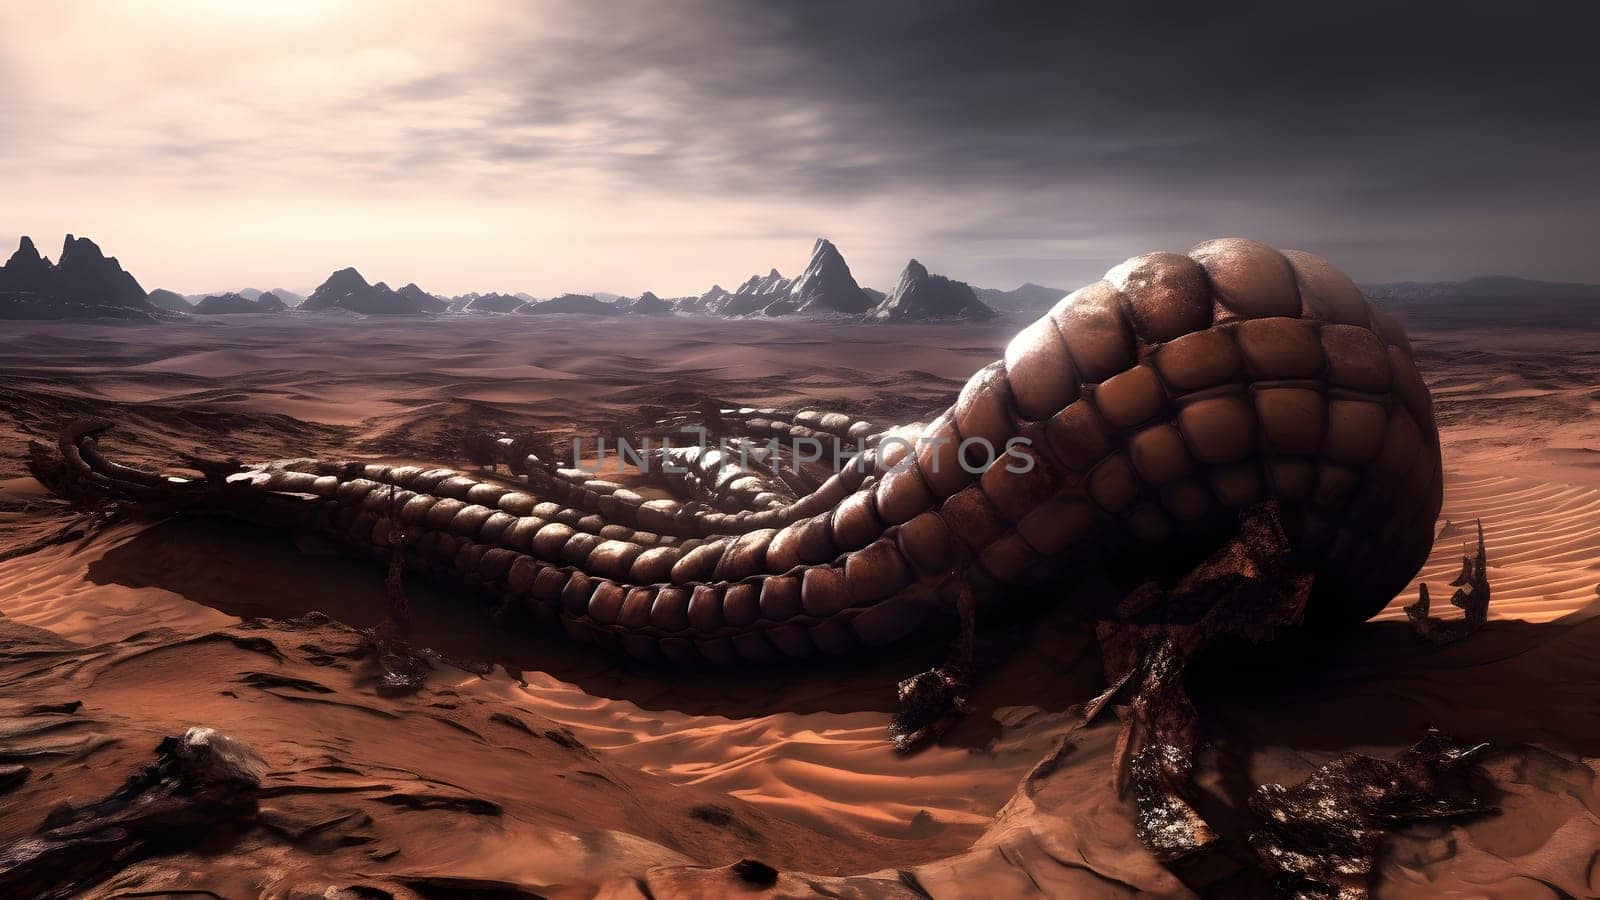 giant worm creature on martian desert surface, neural network generated image by z1b